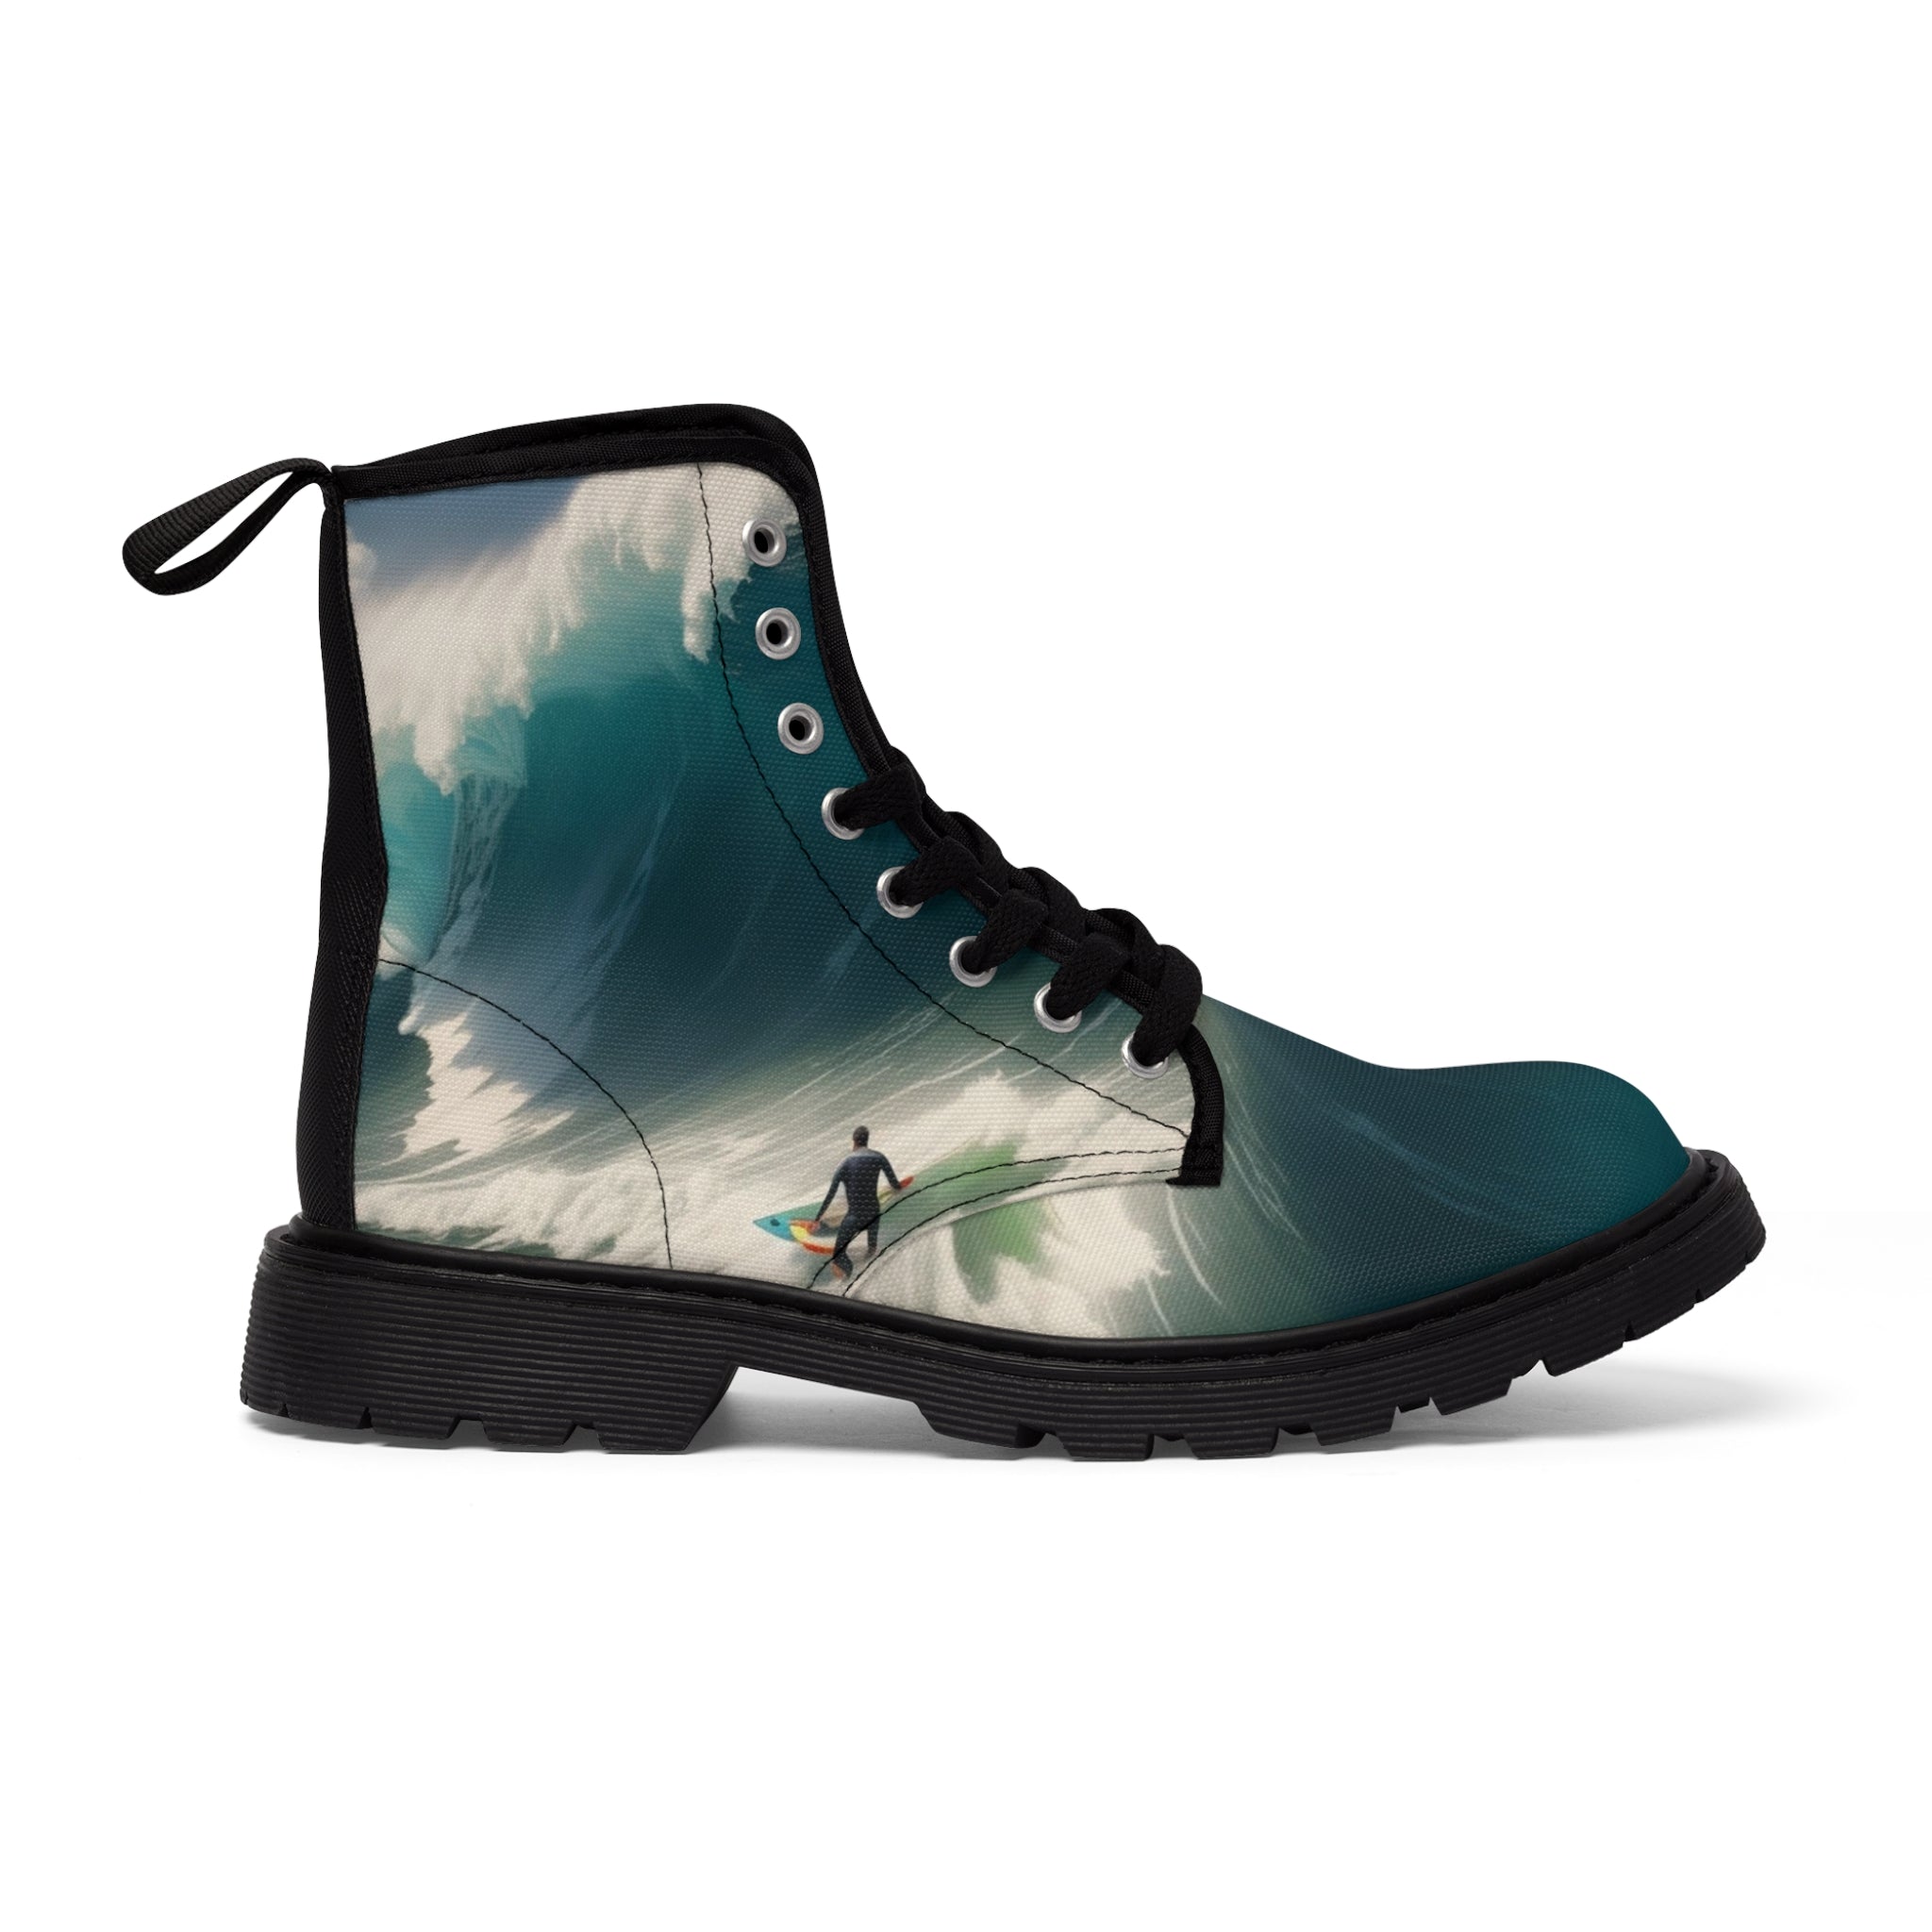 Women's Chasing Waves Boots: Ride the Wave of Style